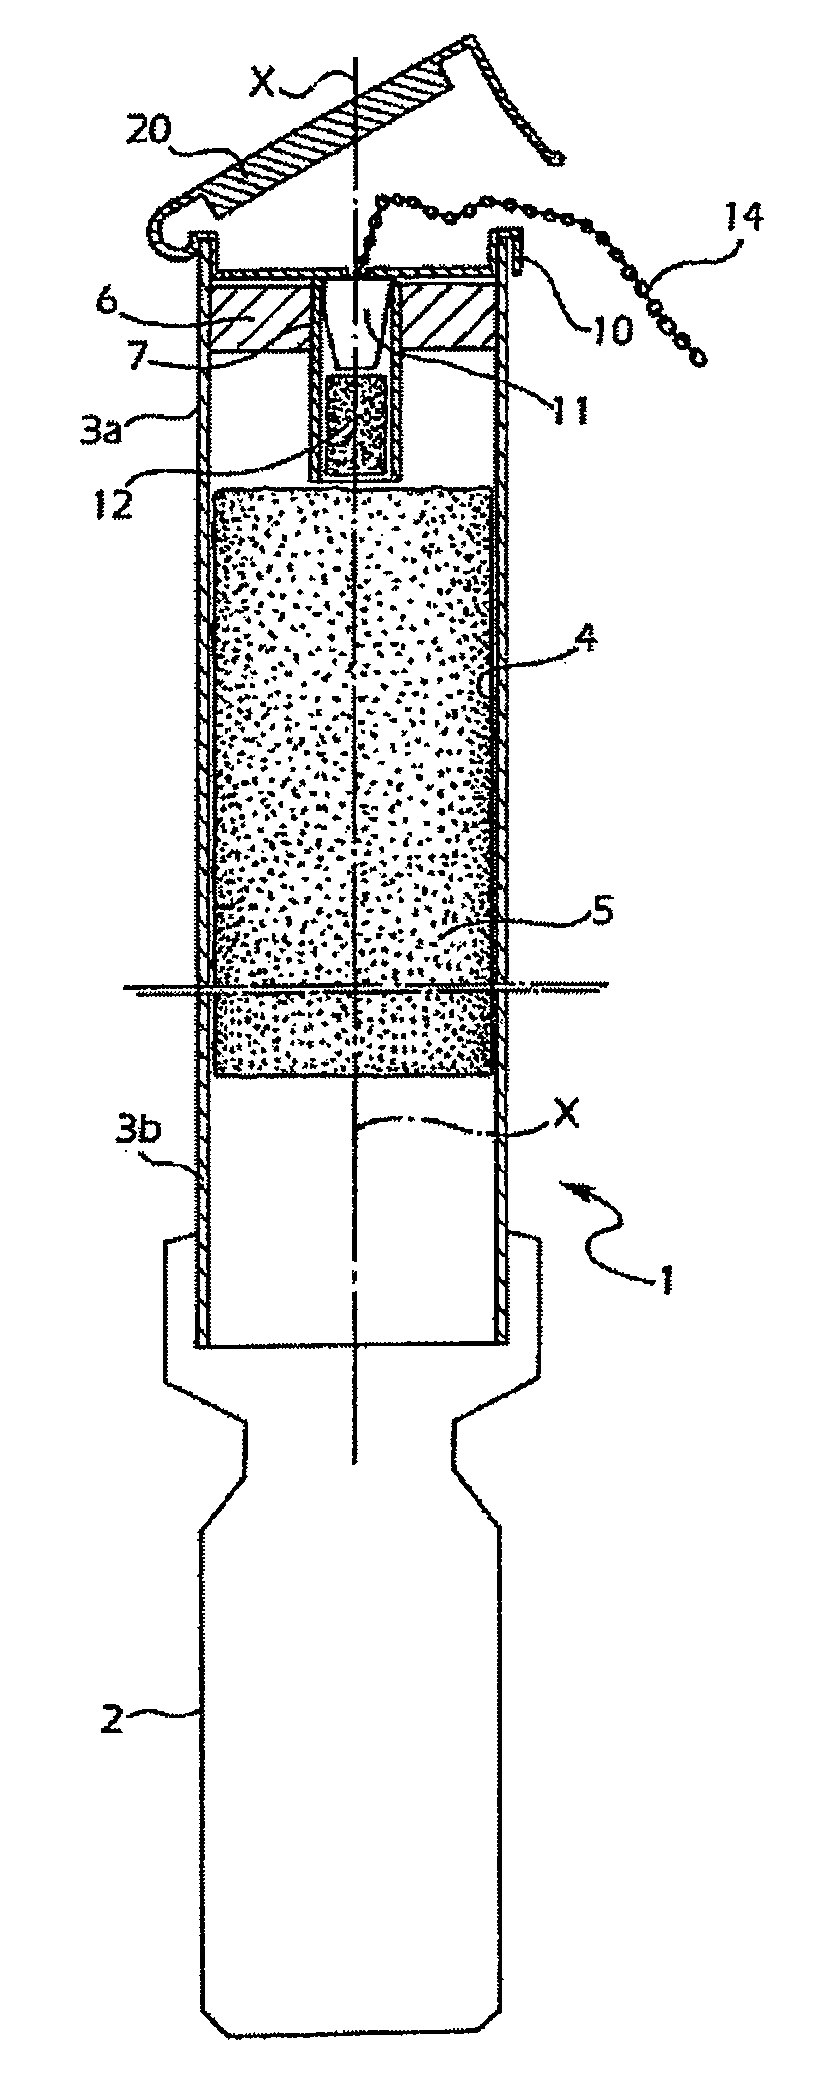 Compositions, methods and devices for control and clean-up of hazardous spills